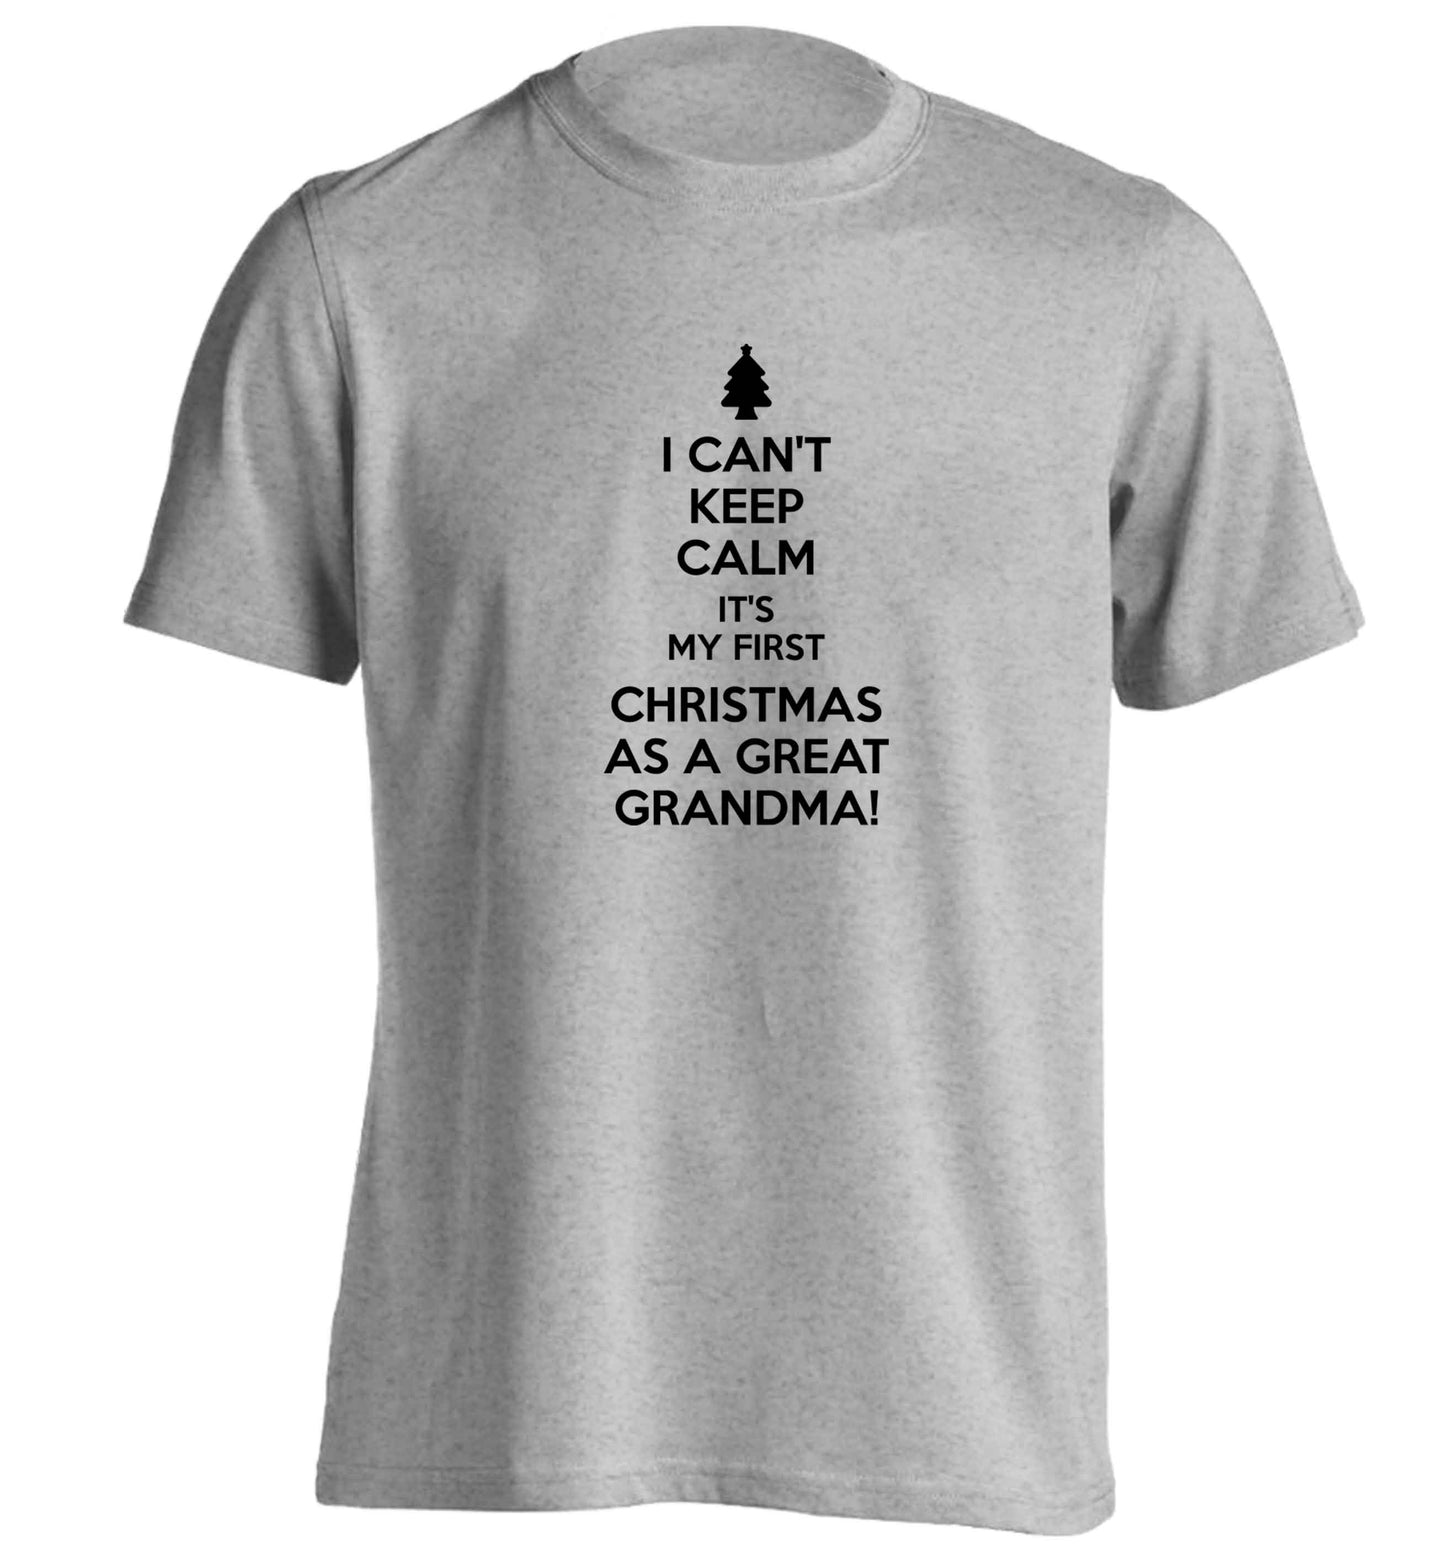 I can't keep calm it's my first Christmas as a great grandma! adults unisex grey Tshirt 2XL